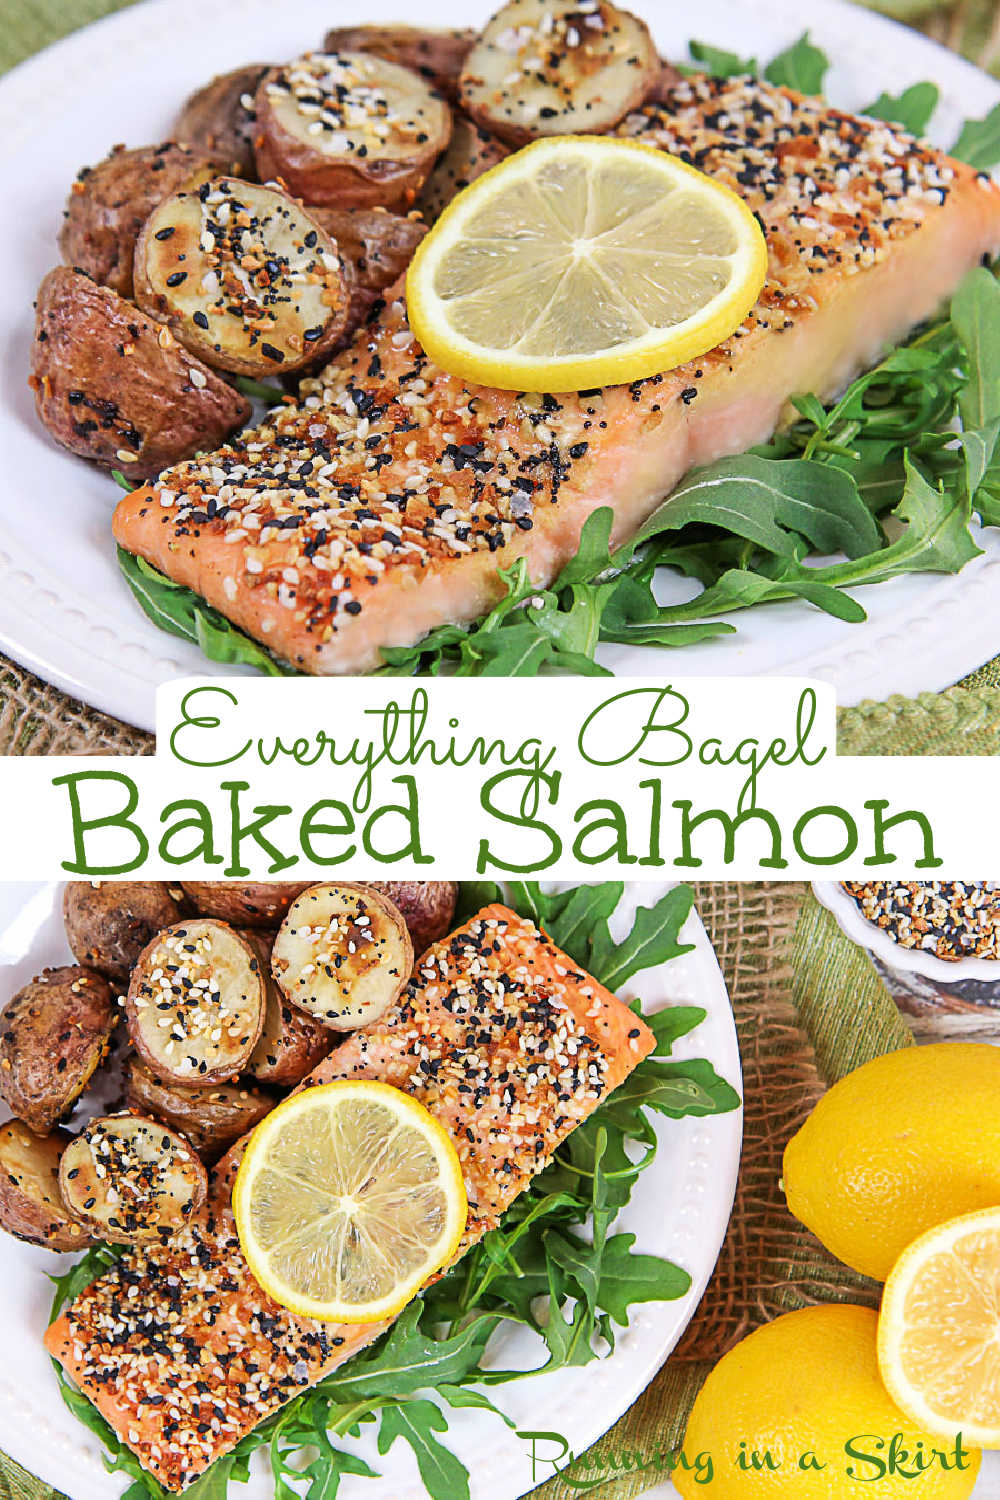 Everything Bagel Salmon Recipe - a healthy oven baked salmon with Everything But the Bagel Seasoning. If you are looking for clean eating, easy, healthy salmon recipes this is it! Only 5 Ingredients and ready in 20 minutes. It's the perfect pescatarian, low carb and gluten free meal. Uses the Trader Joe's spice or your own DIY version. Keto, Paleo, Whole 30 Friendly. / Running in a Skirt #pescatarian #cleaneating #salmonrecipe #fishrecipe #healthyrecipe #healthydinner #everythingbagel #traderjoes via @juliewunder